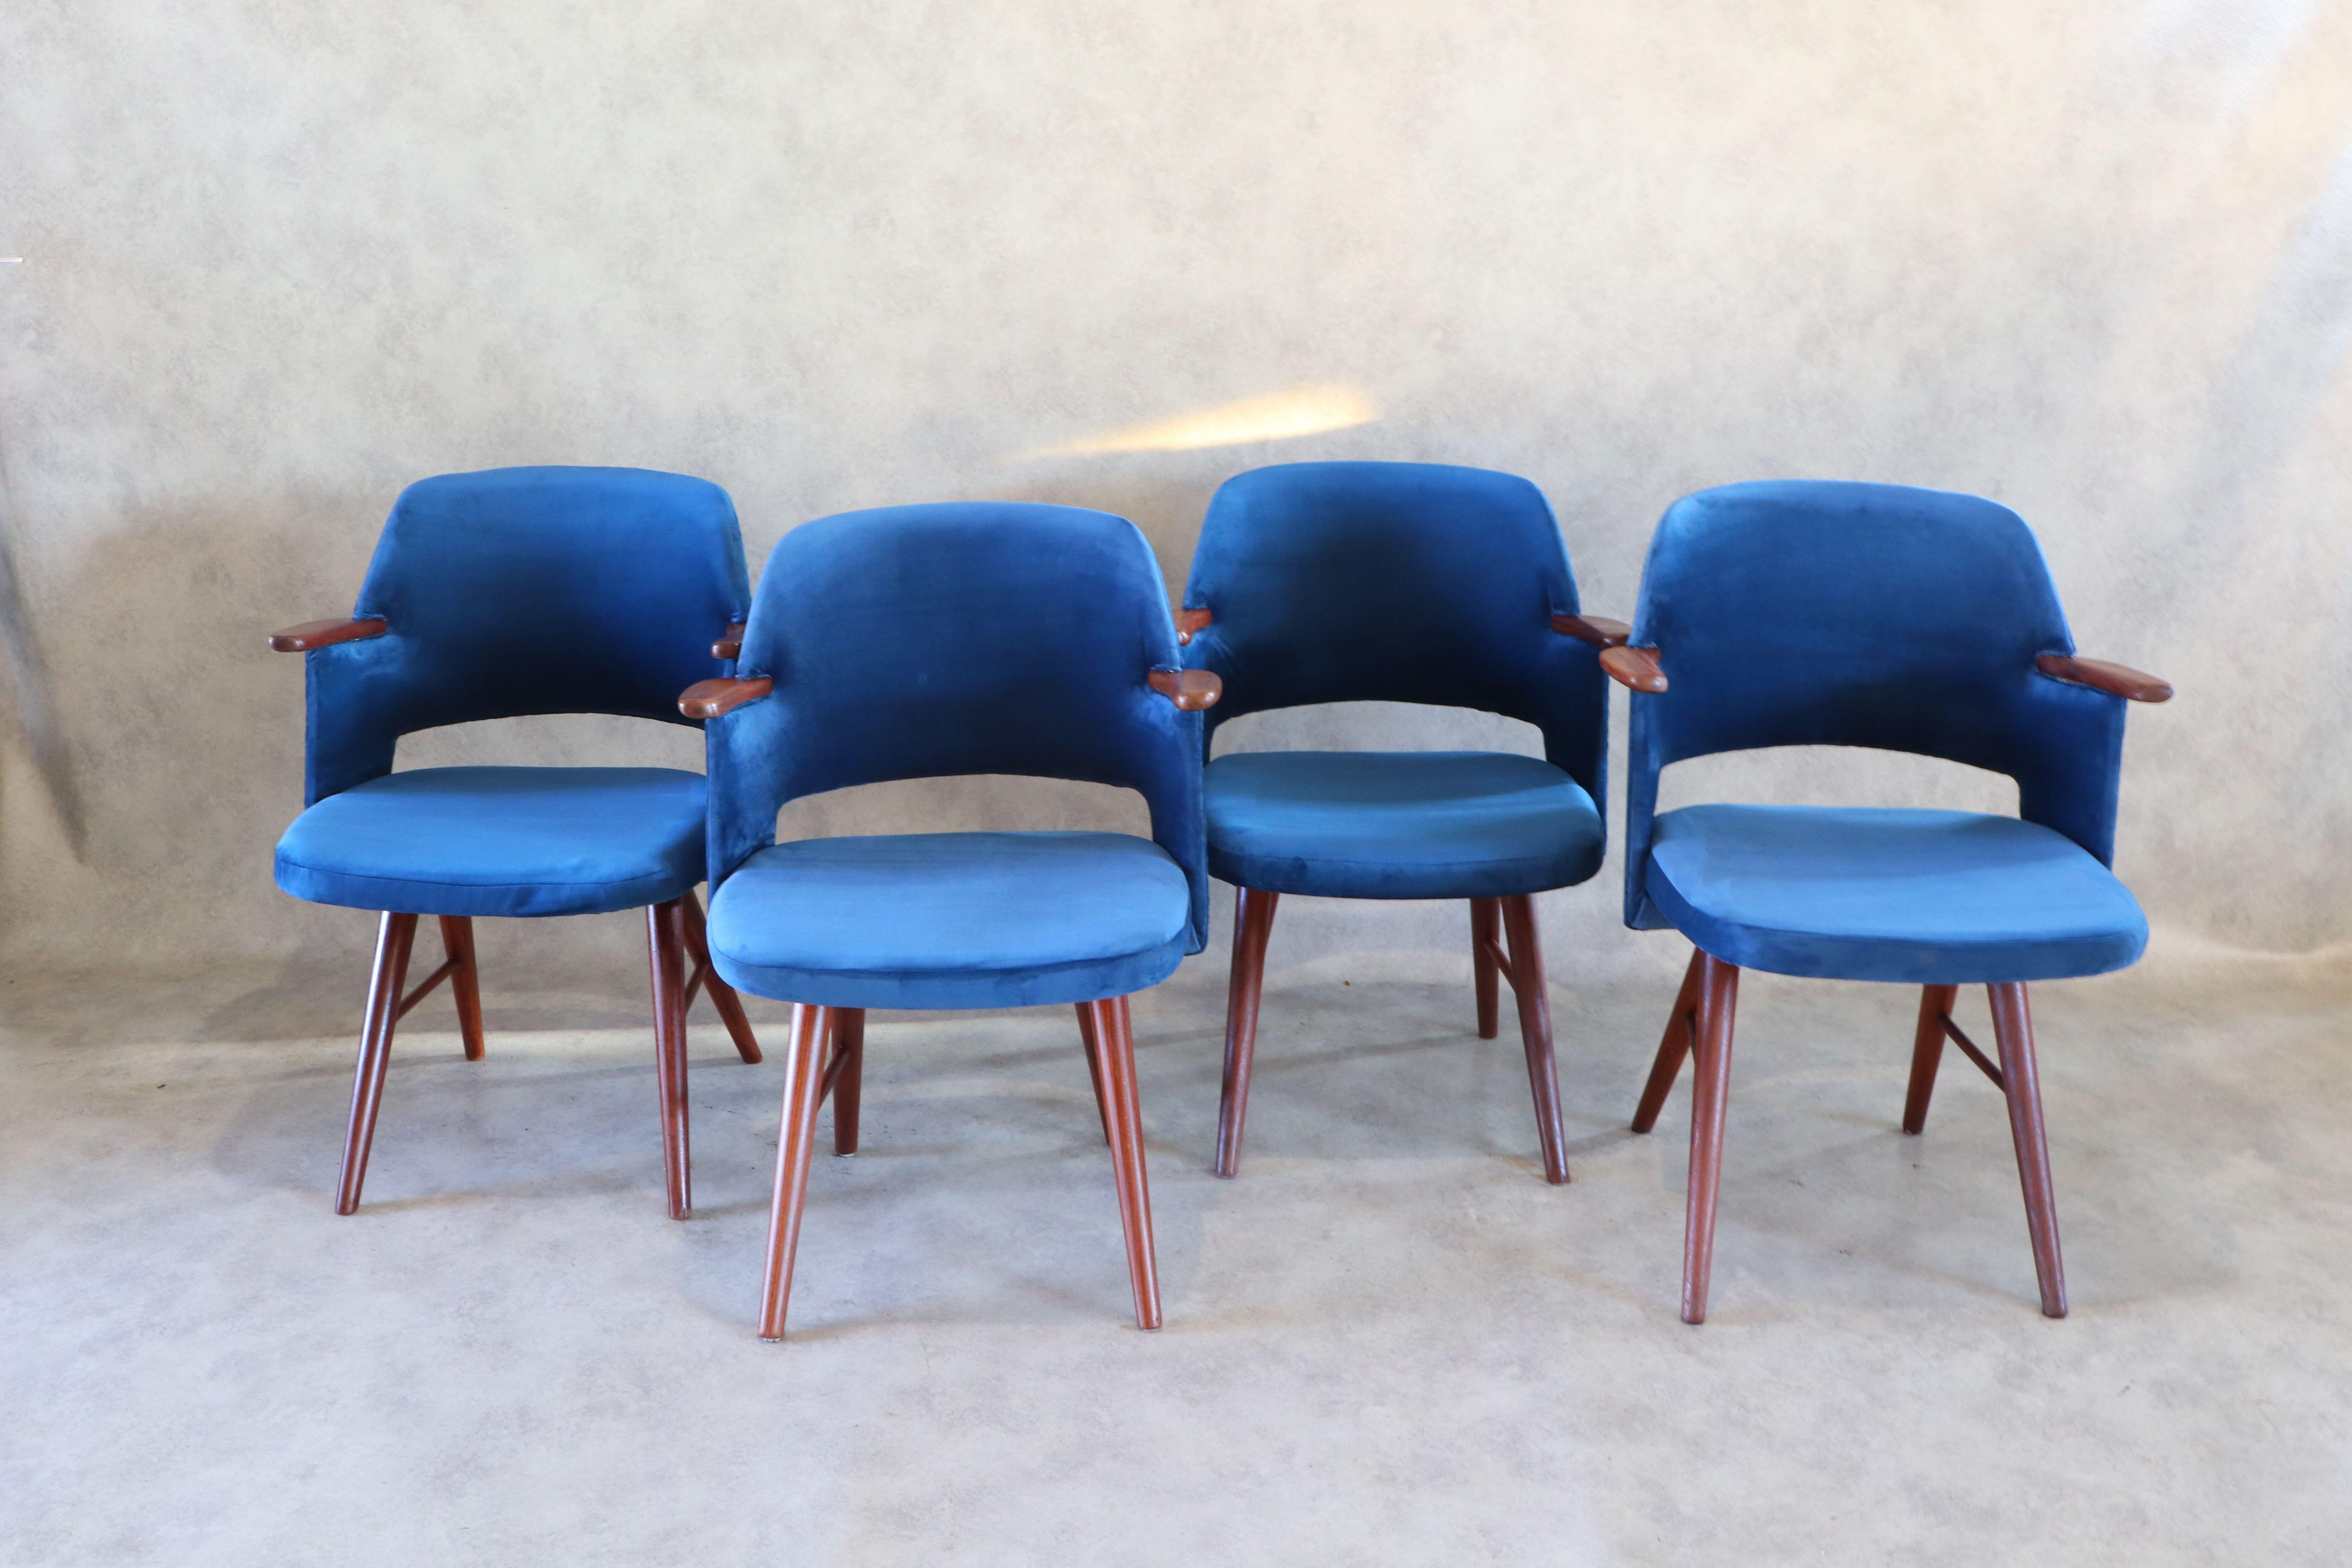 Wonderful and rare set of four Mid-Century Modern FT30 dining chairs. Design by Cees Braakman for UMS Pastoe. Striking Dutch design from the sixties. Solid teak and re-upholstered with stylish Italian blue velvet. The chairs are marked with the